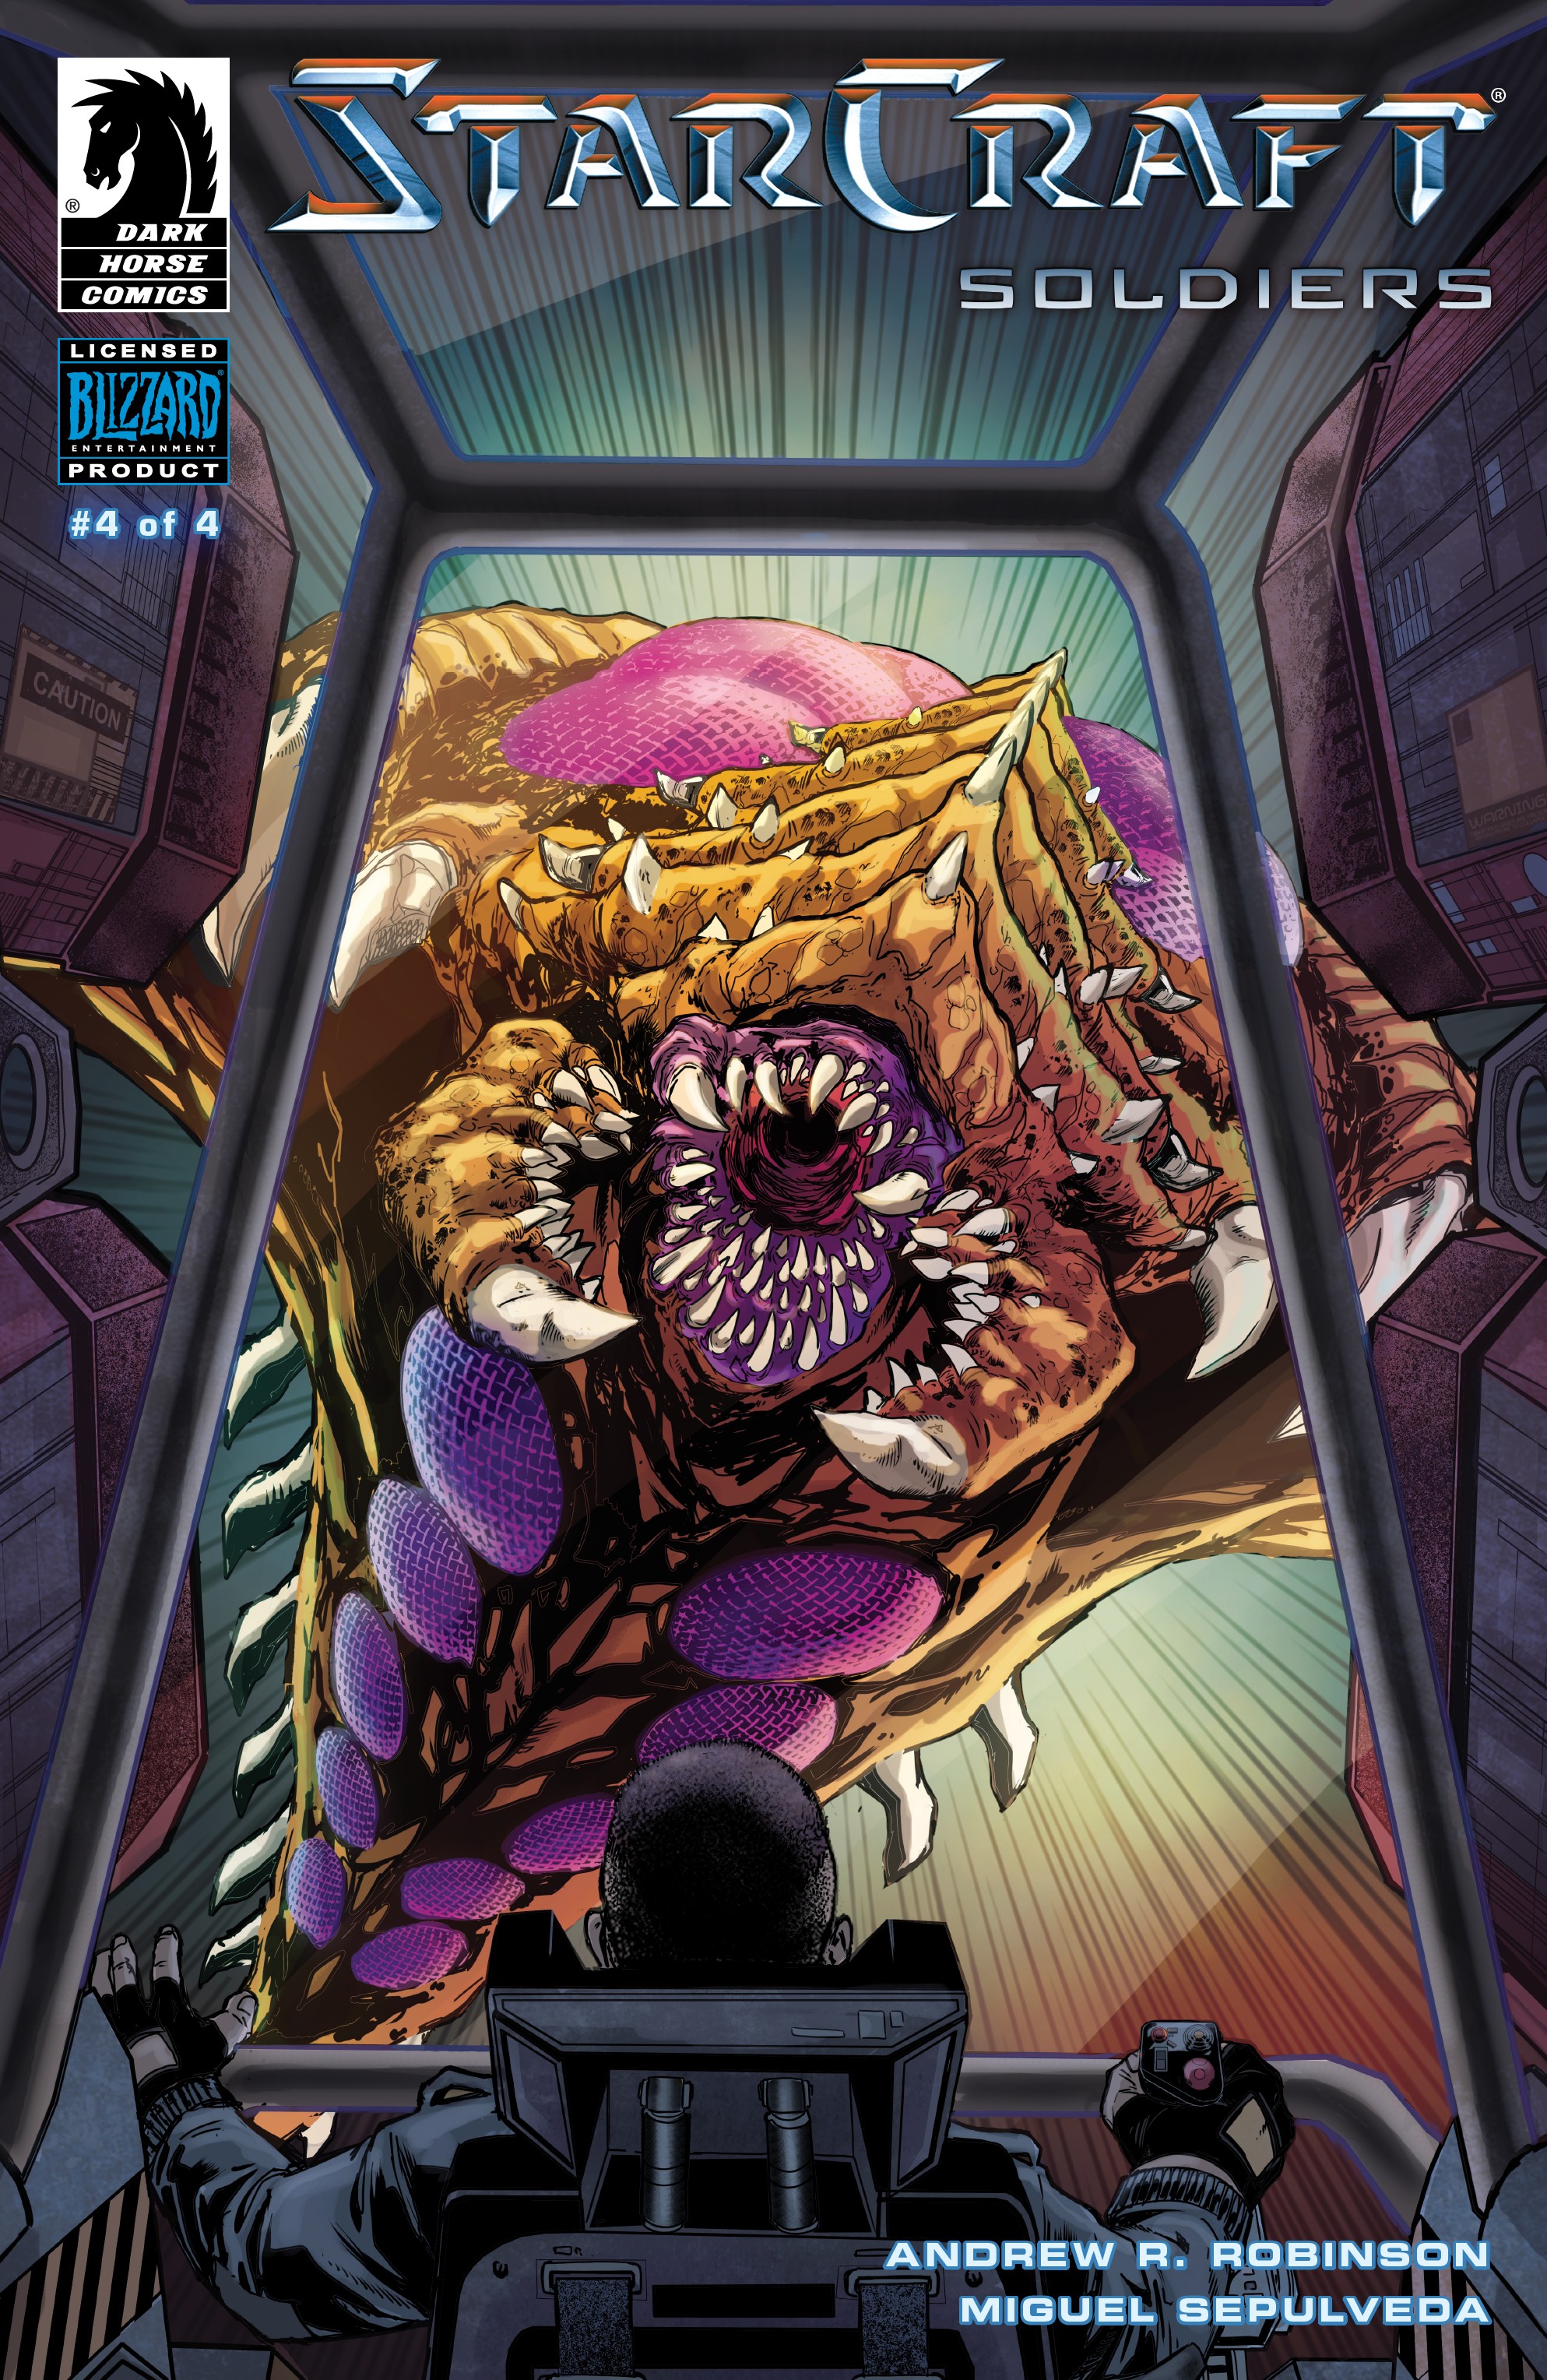 Read online StarCraft: Soldiers comic -  Issue #4 - 1